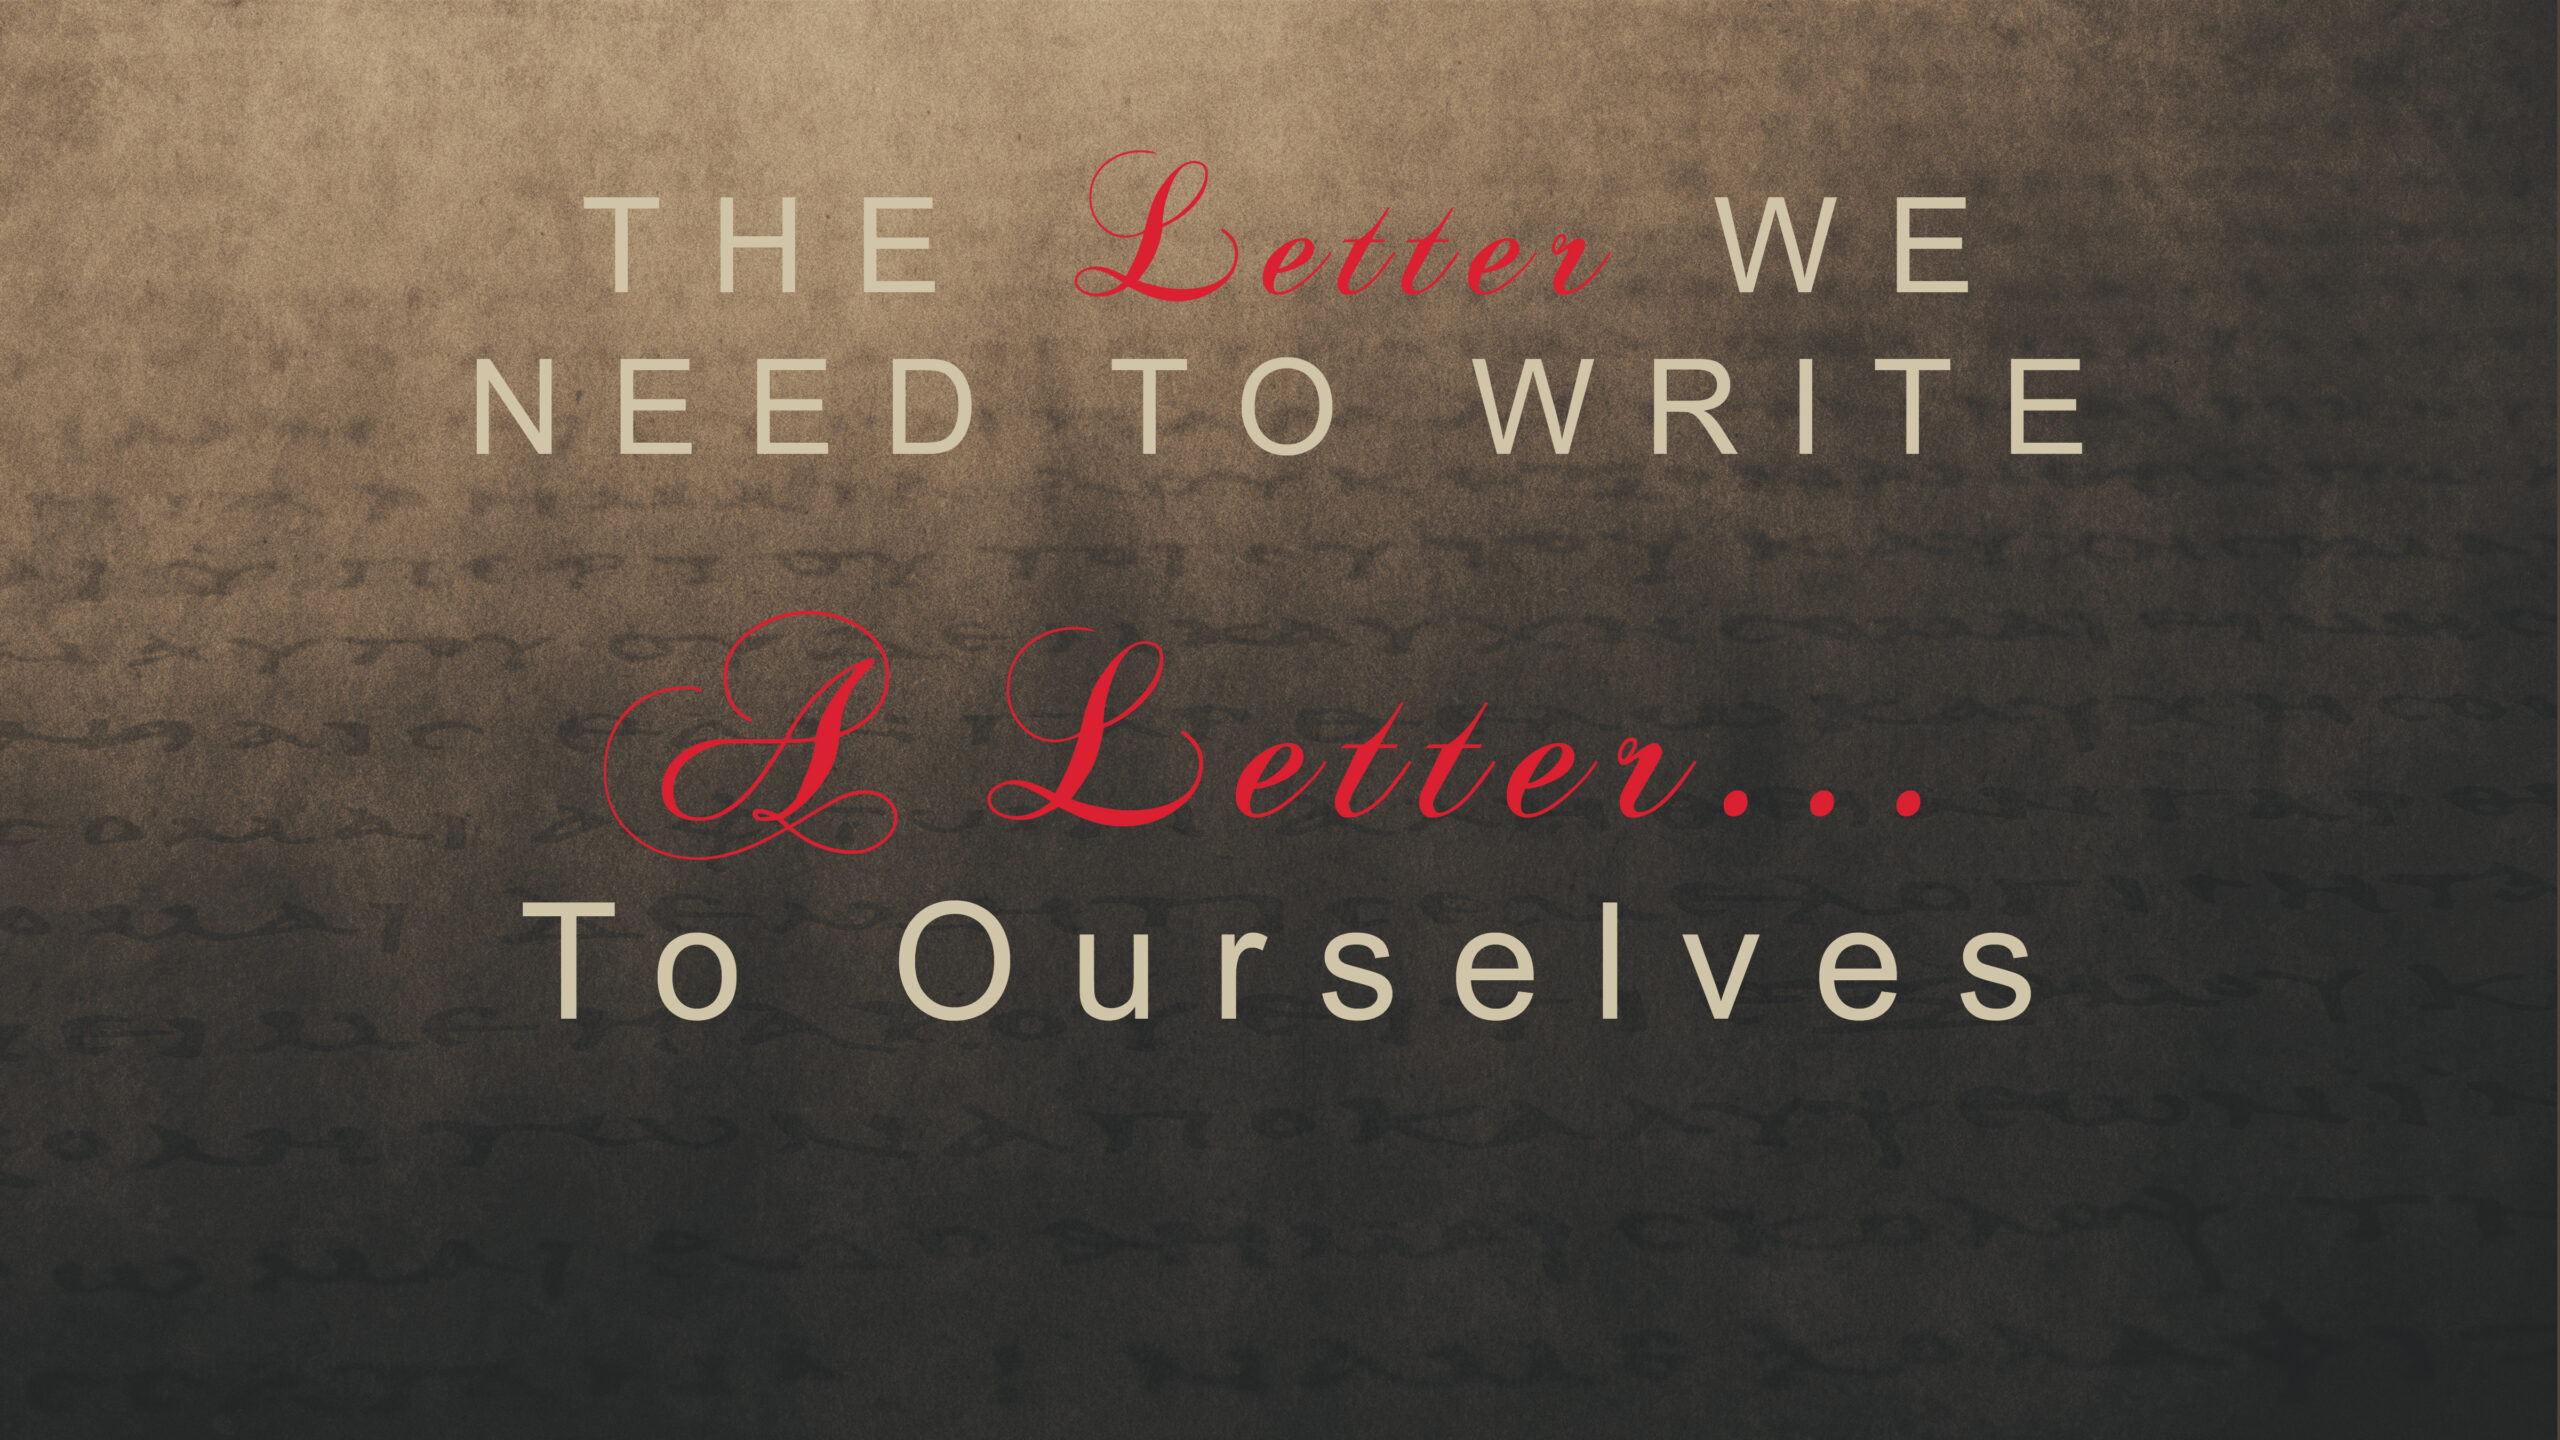 The Letter We Nee to Write PART 6 “A Letter…To Ourselves” (Traditional Service)